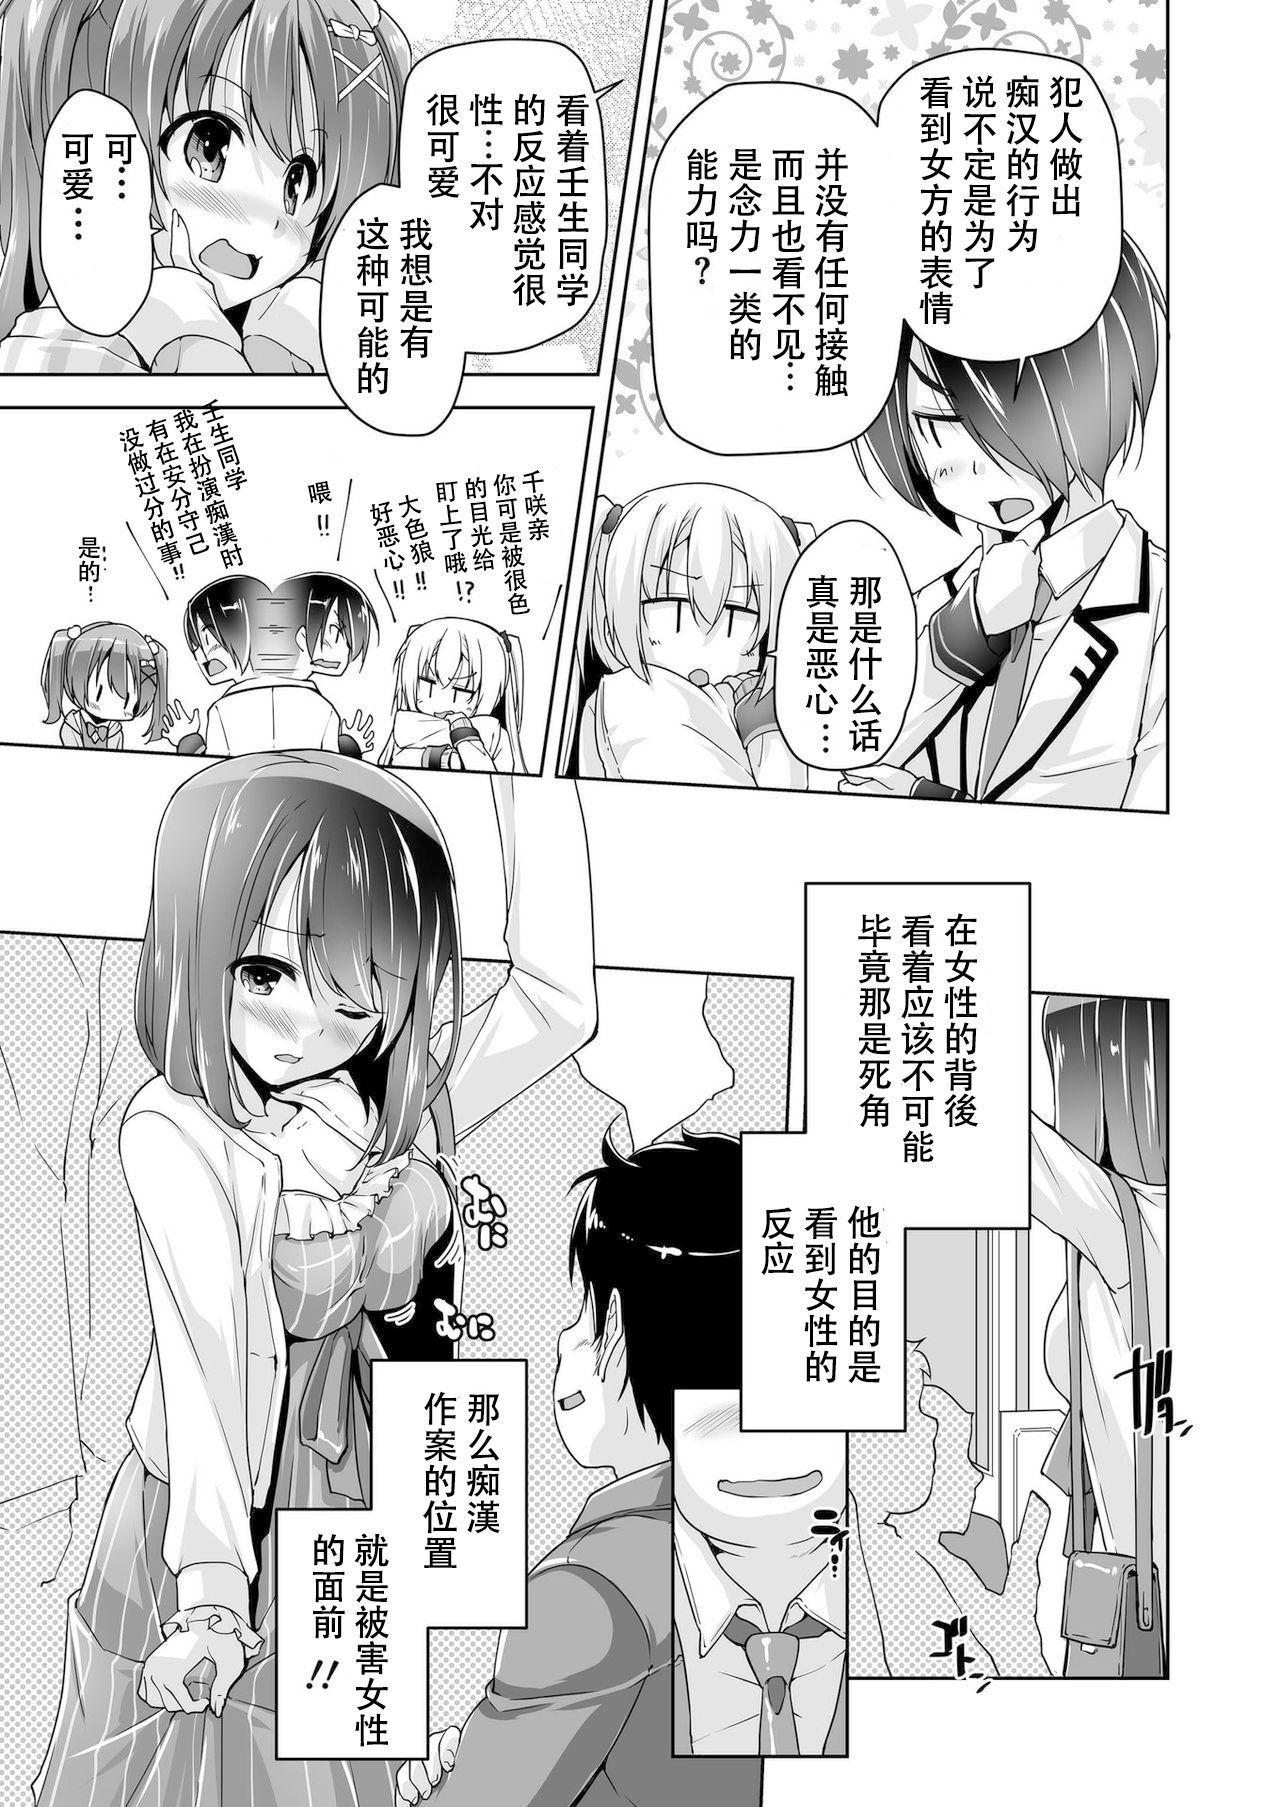 Young Tits Chisaki to chikan play de hatsu H! ? - Riddle joker Hogtied - Page 5